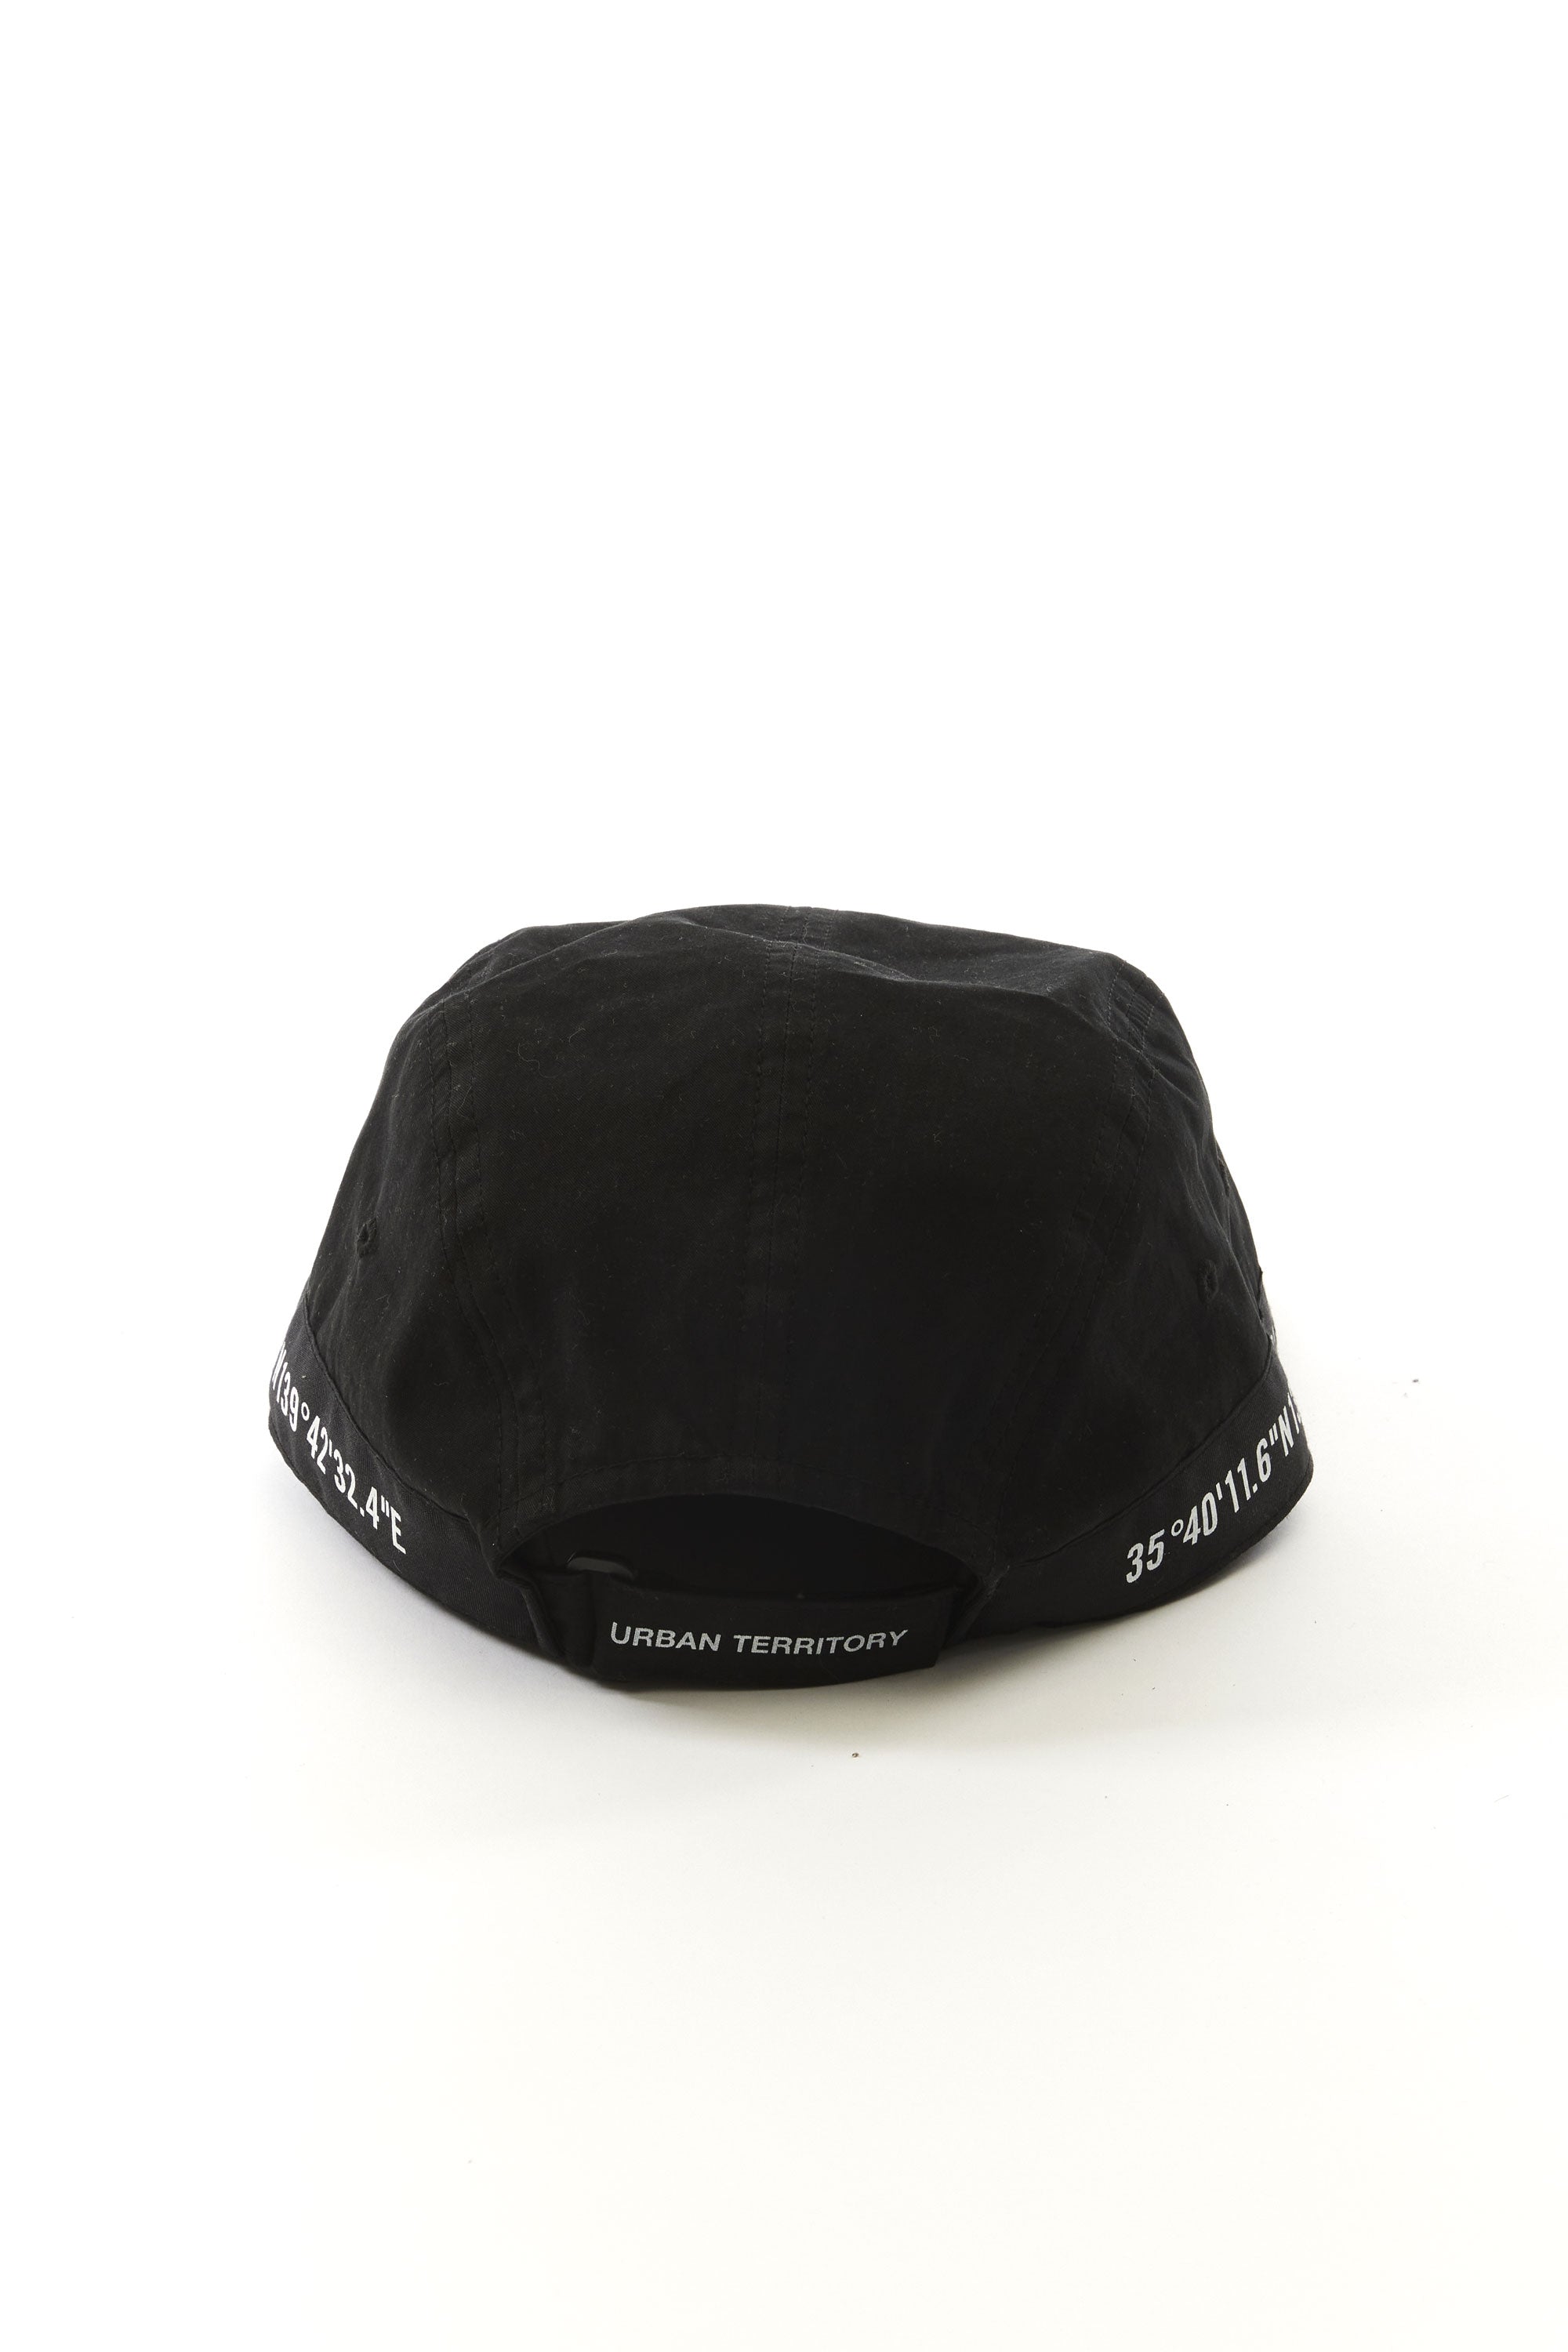 The WTAPS - T-7 GPS WEATHER CAP  available online with global shipping, and in PAM Stores Melbourne and Sydney.